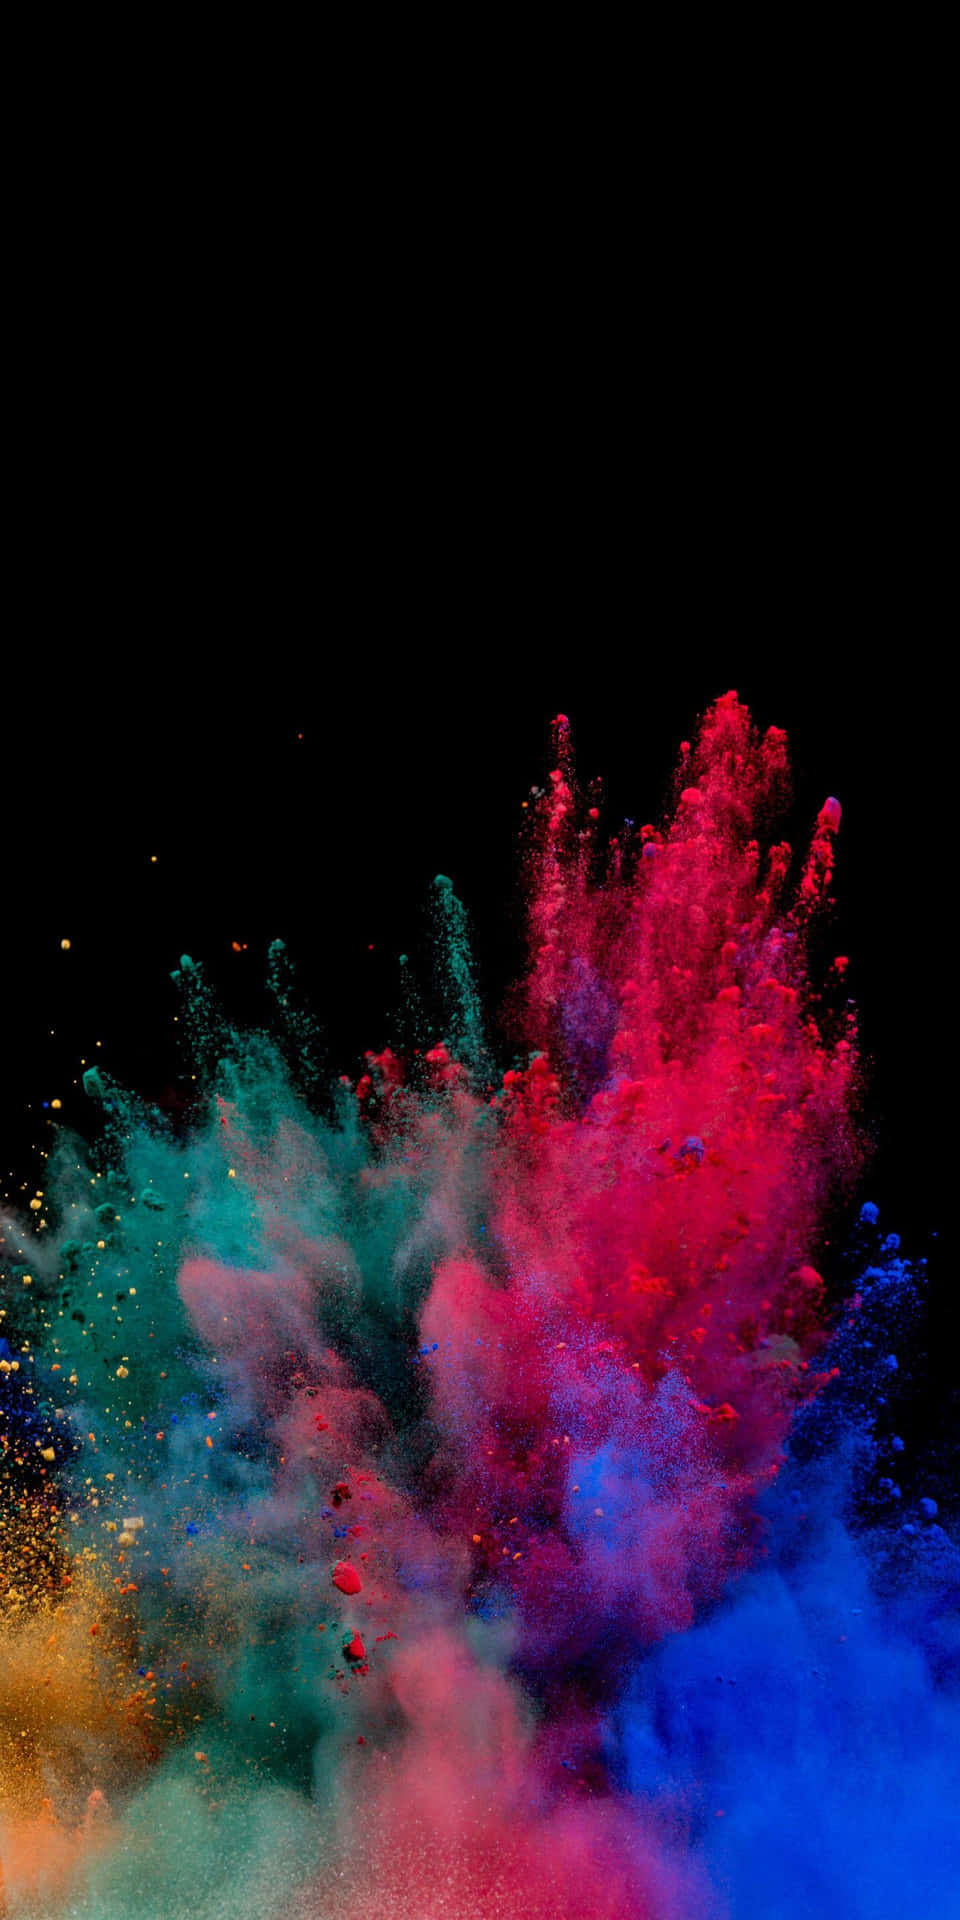 Hd Oled Colored Powder Background